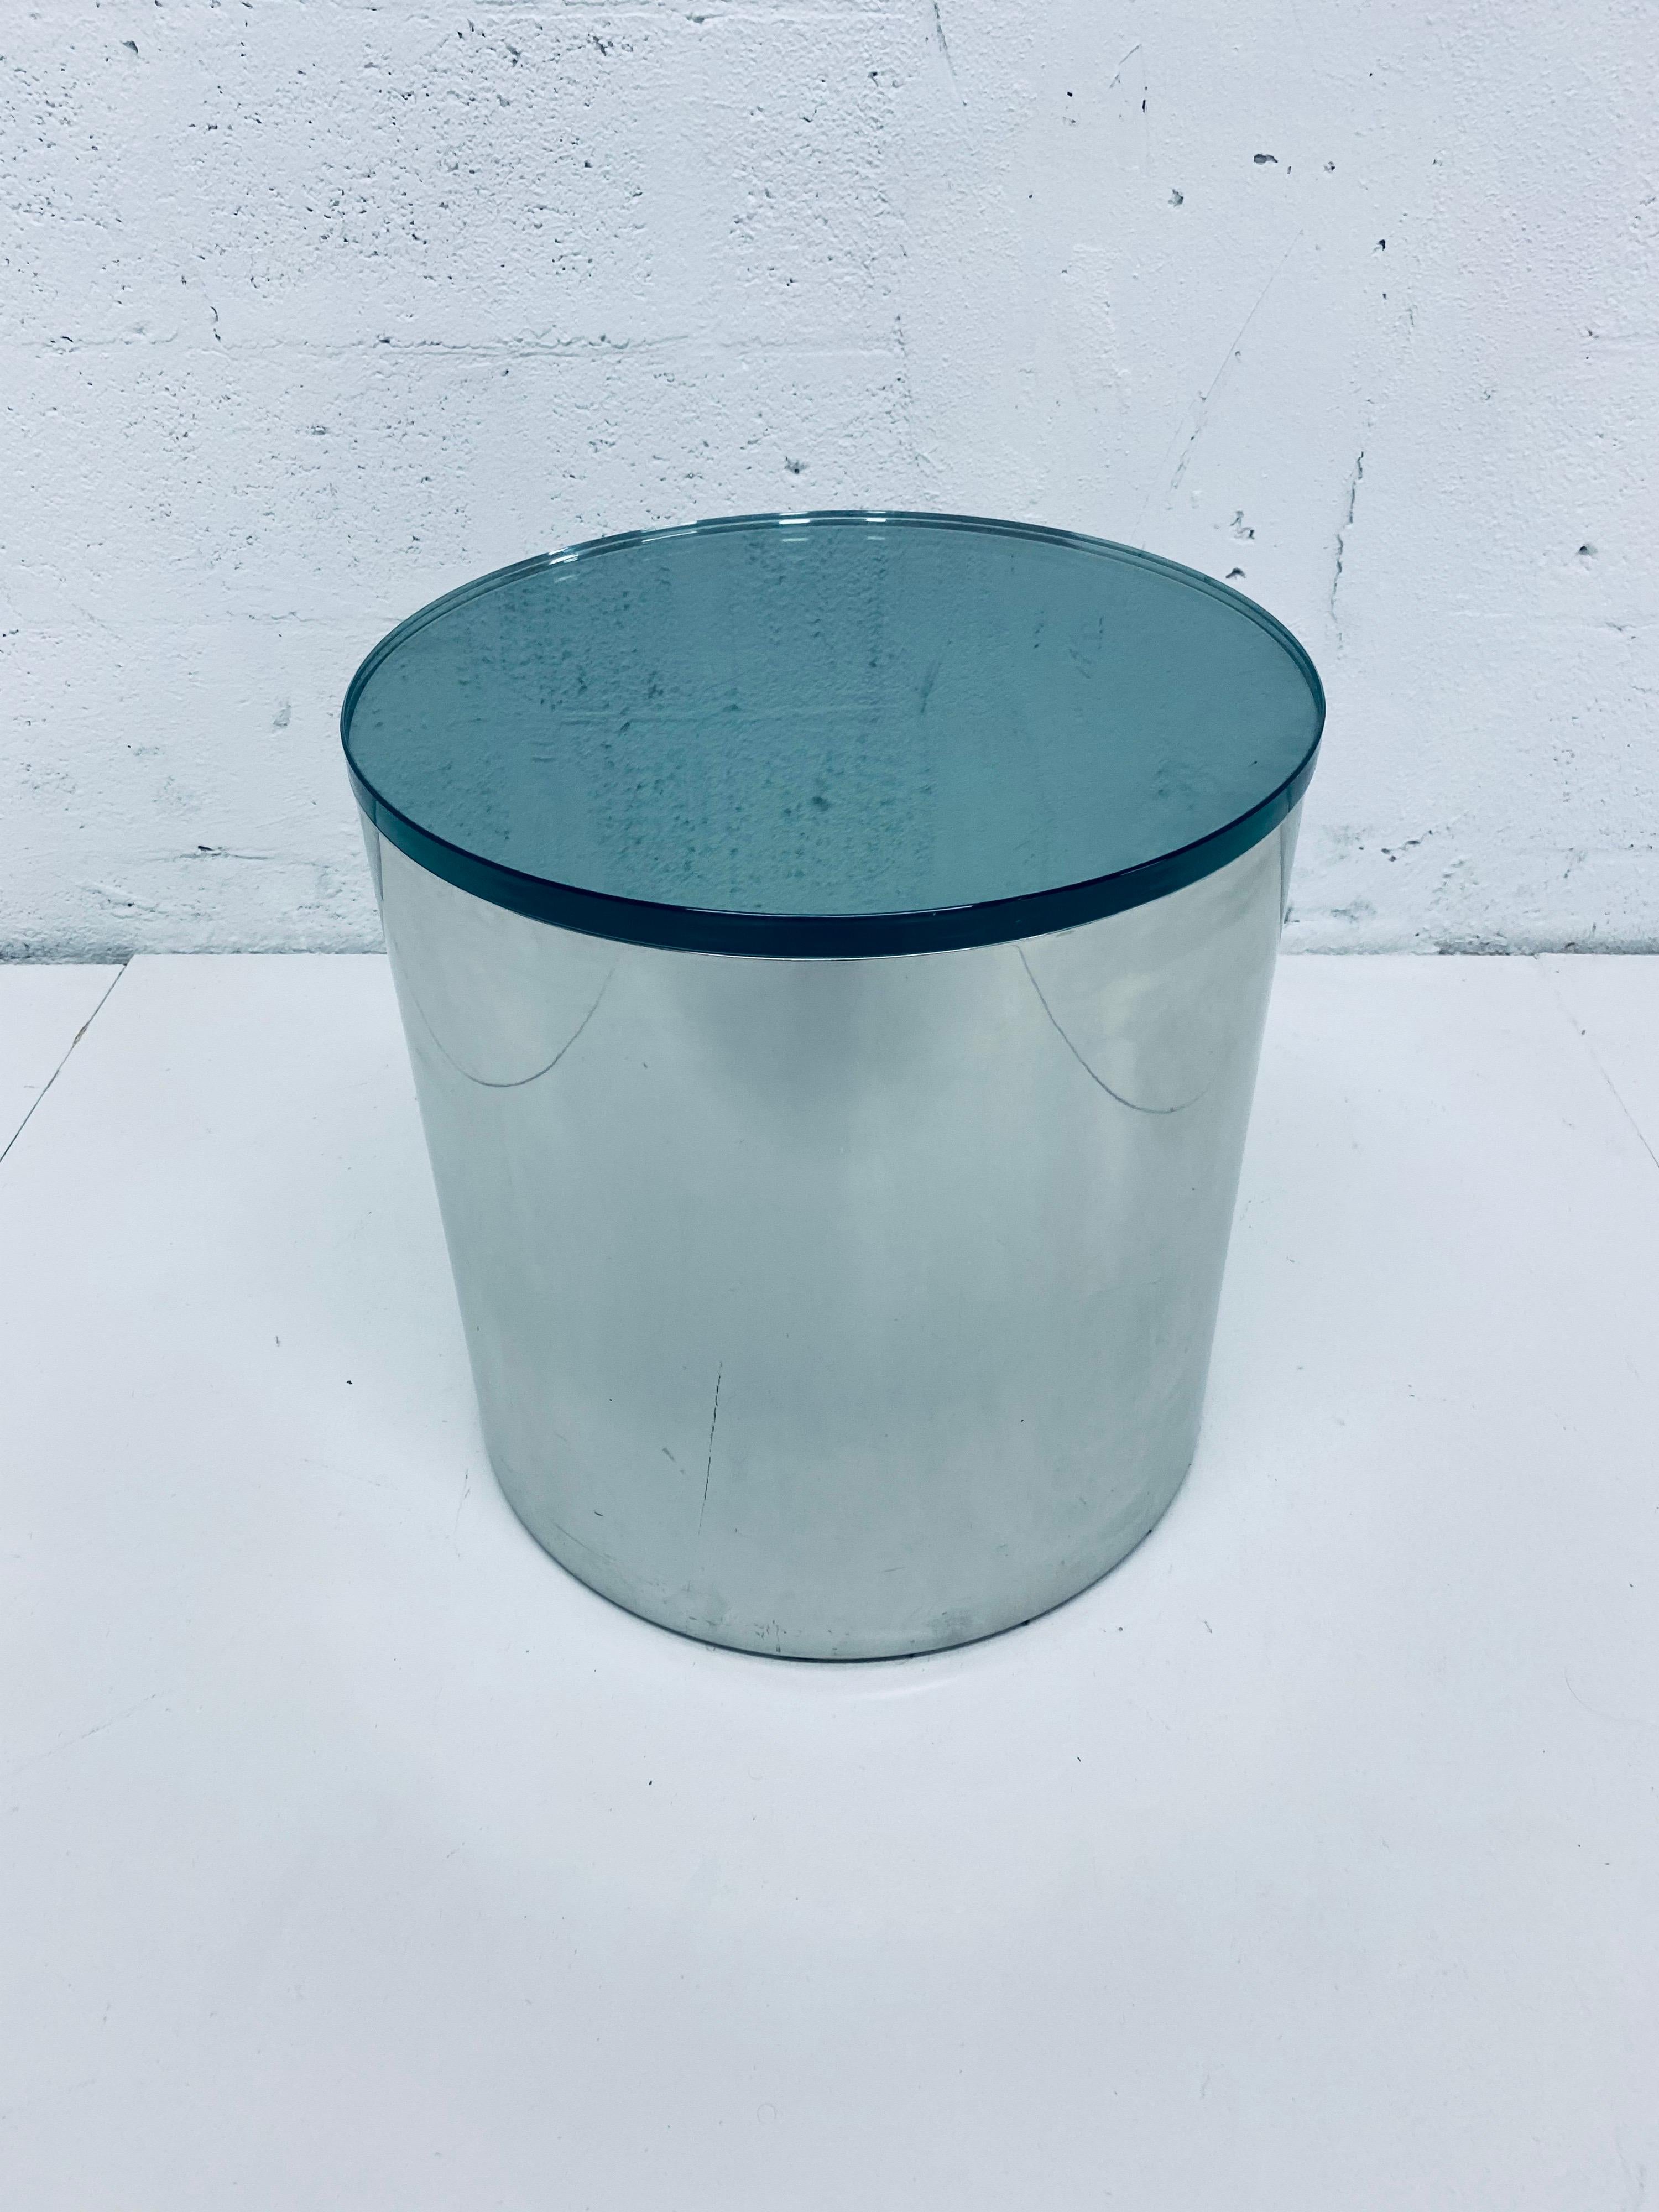 Paul Mayen Polished Steel and Glass Side Table for Habitat, 1970s 11